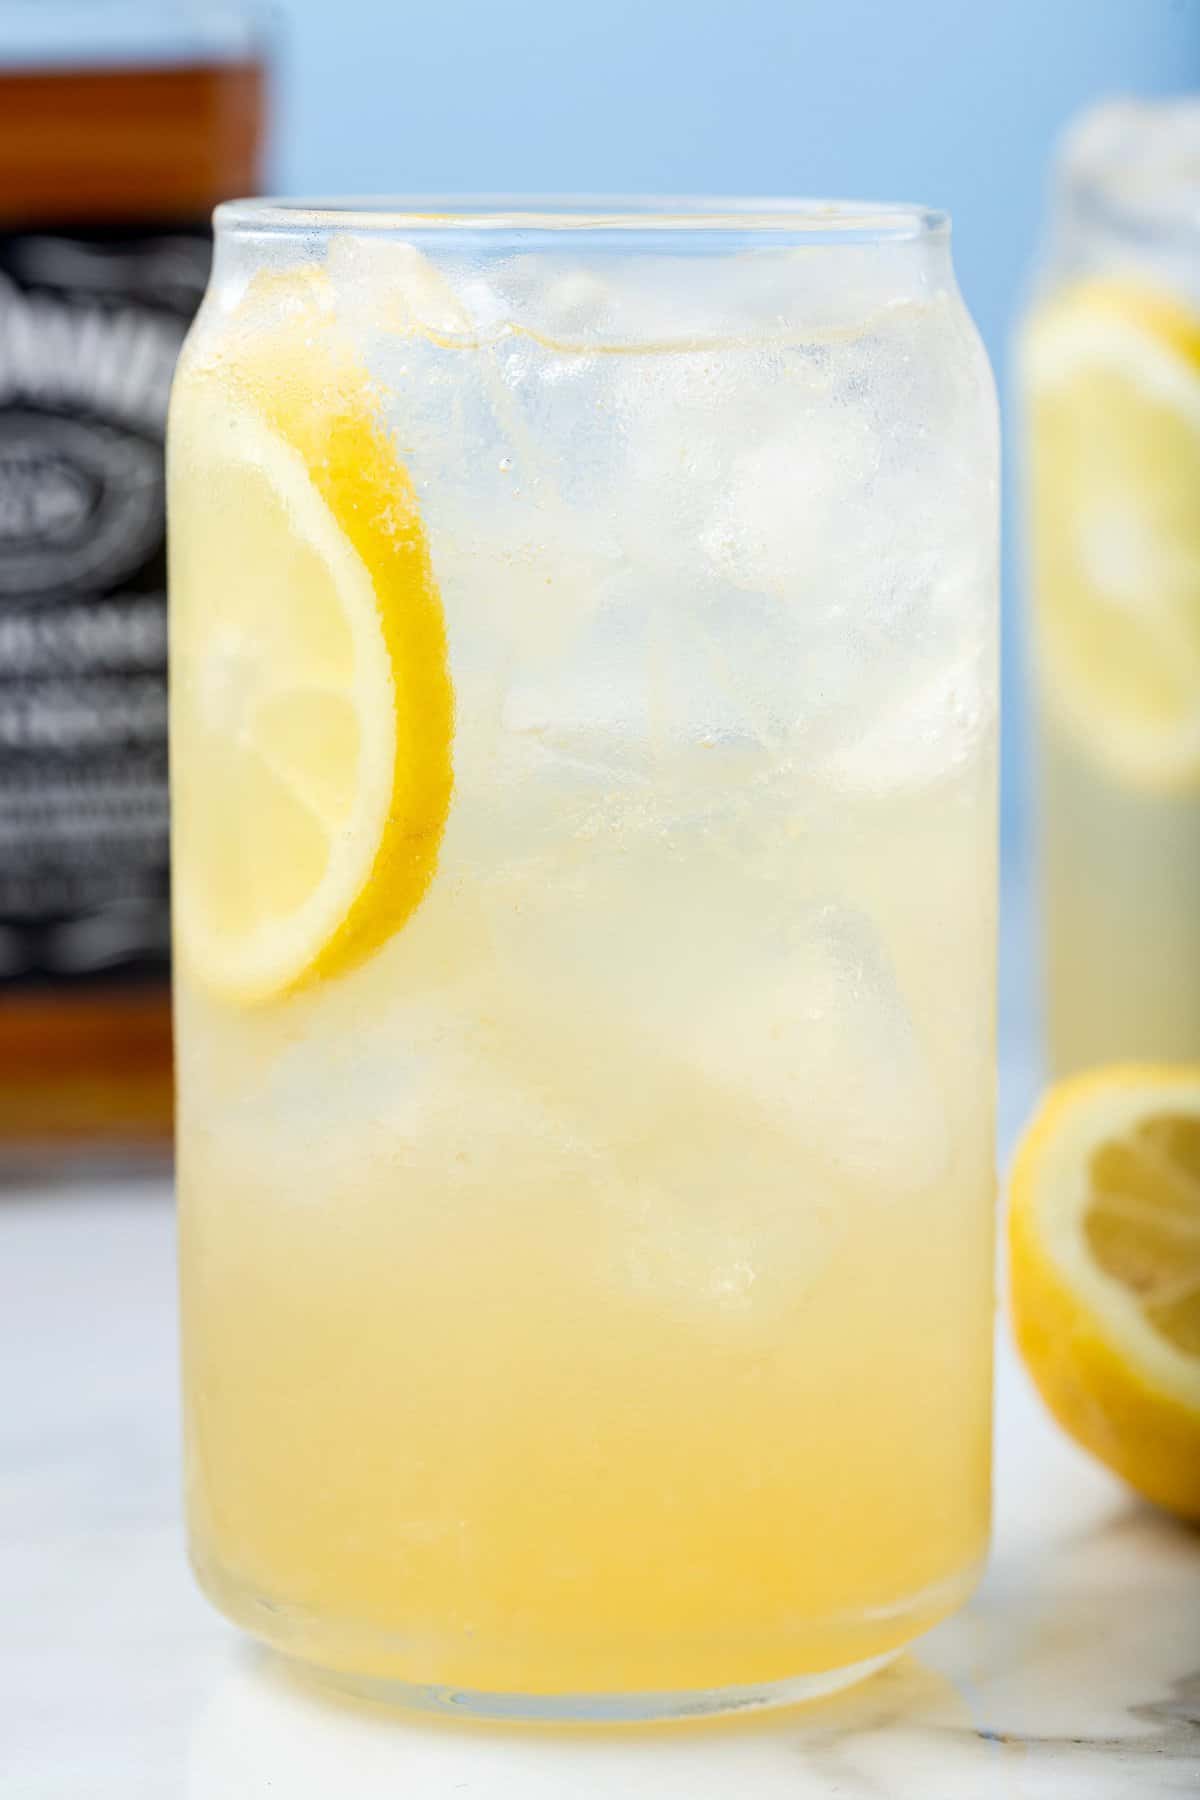 Glass with Whiskey lemonade in it